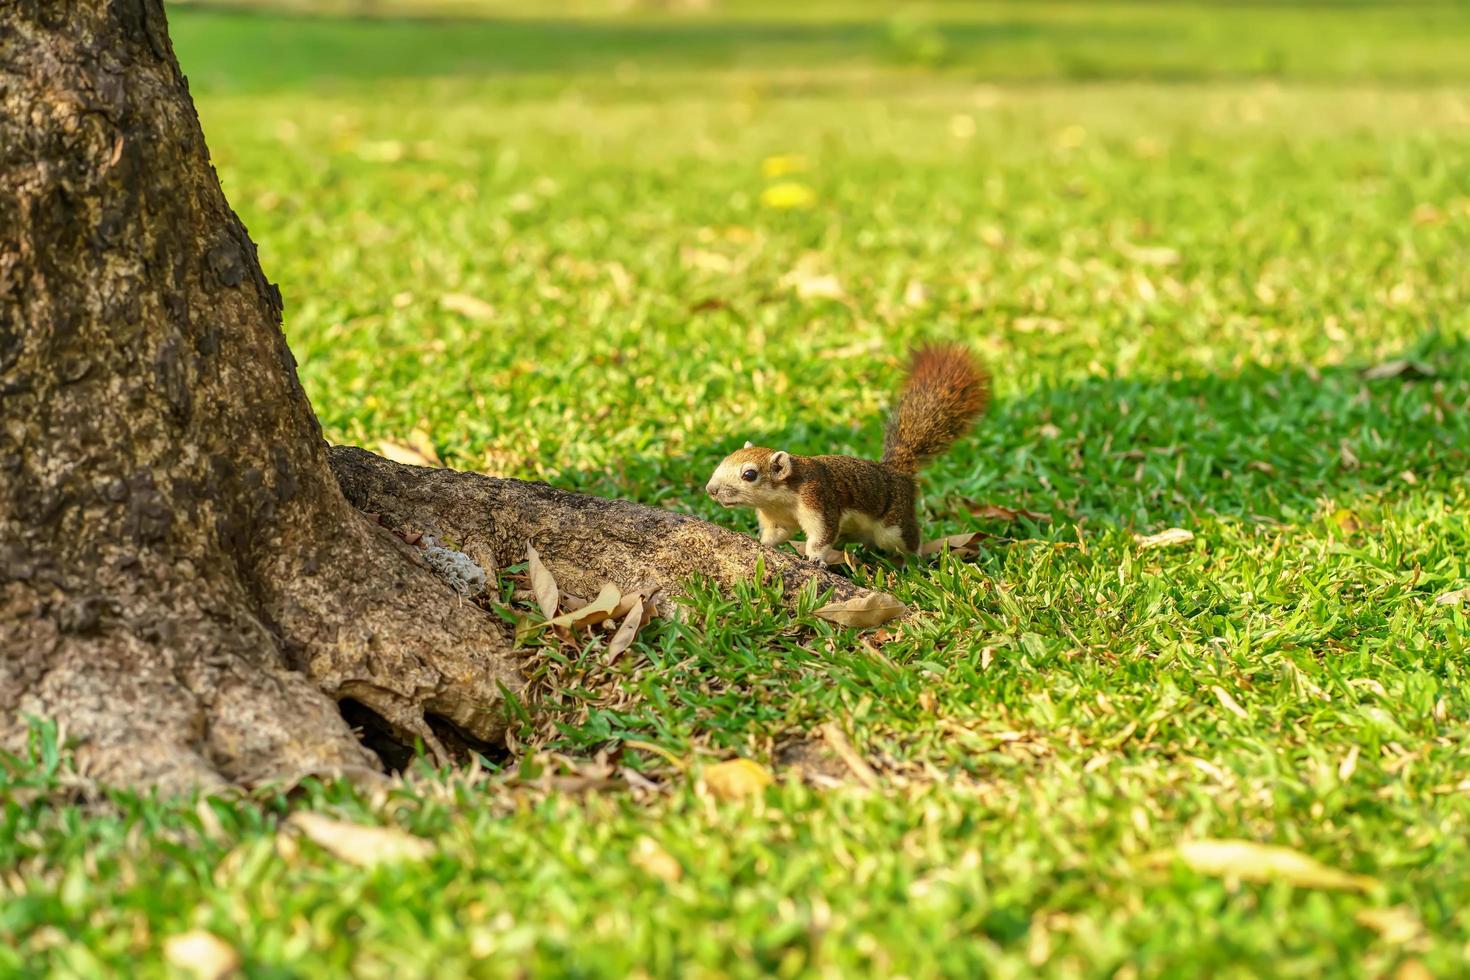 The little squirrel on the grass in the park. photo